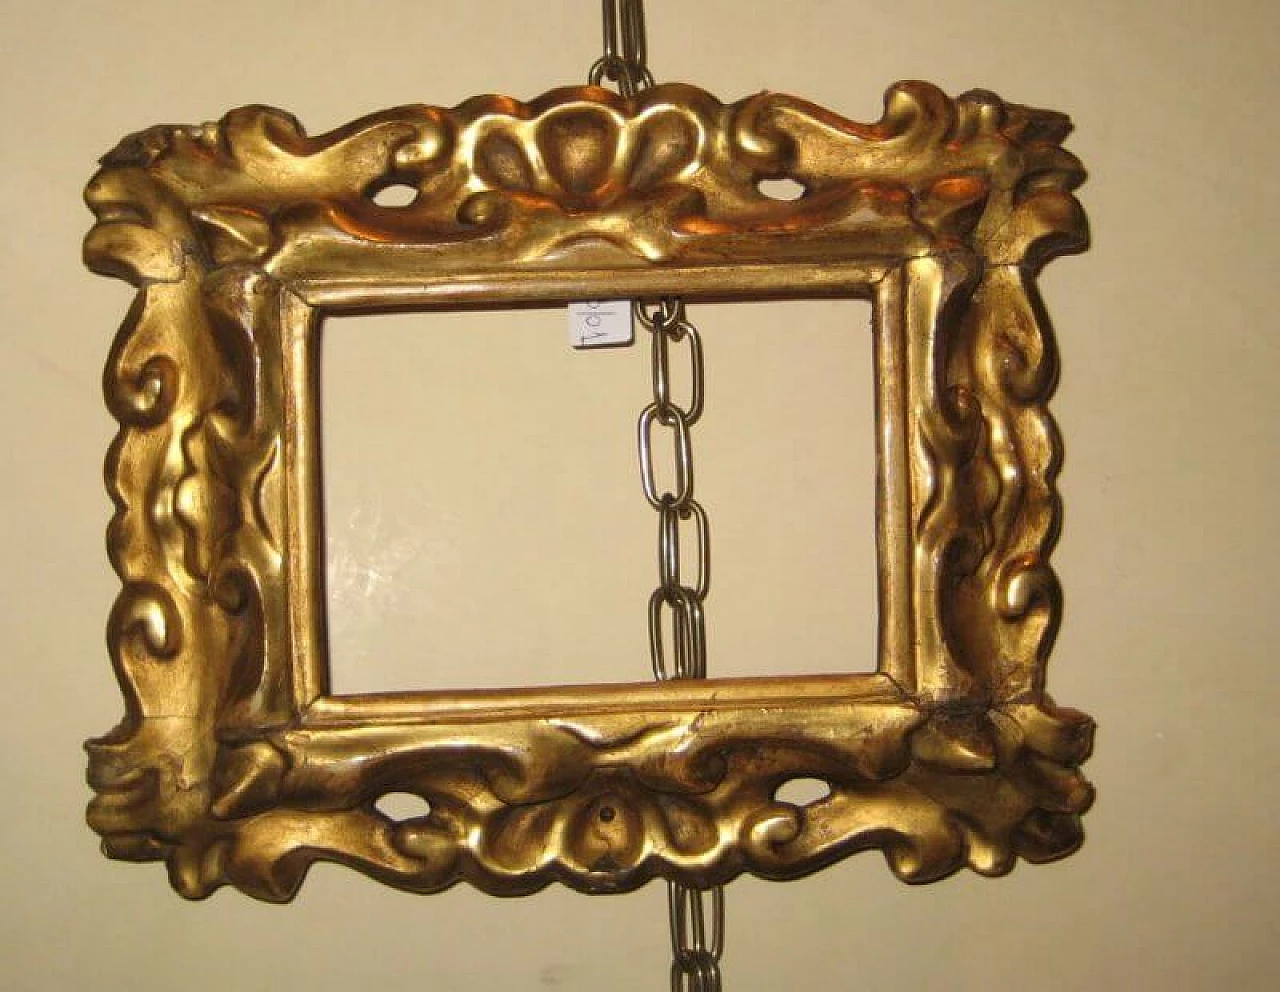 Carved and gilded frame, 18th century 1324770